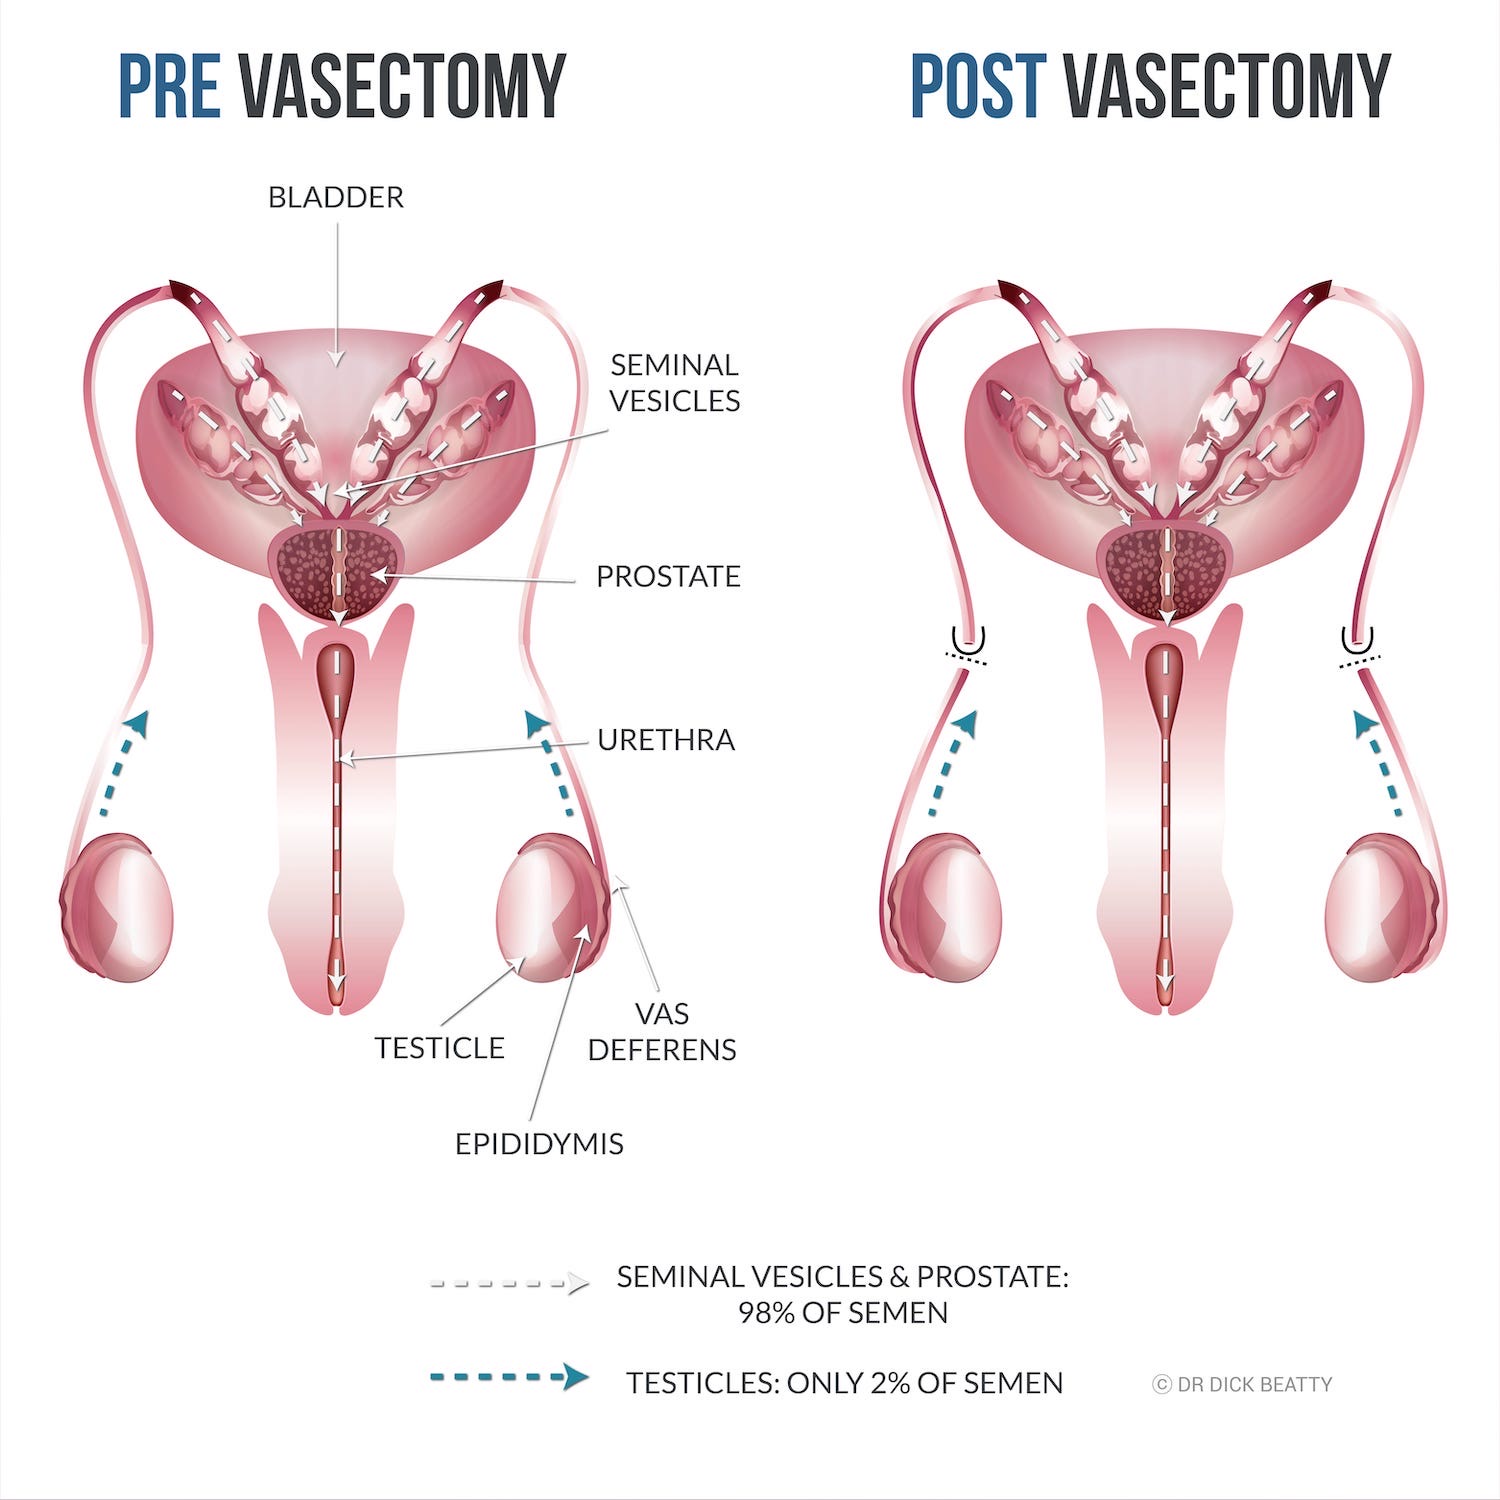 About Vasectomy - What, How, Why, Risks & Myths - in words & figures